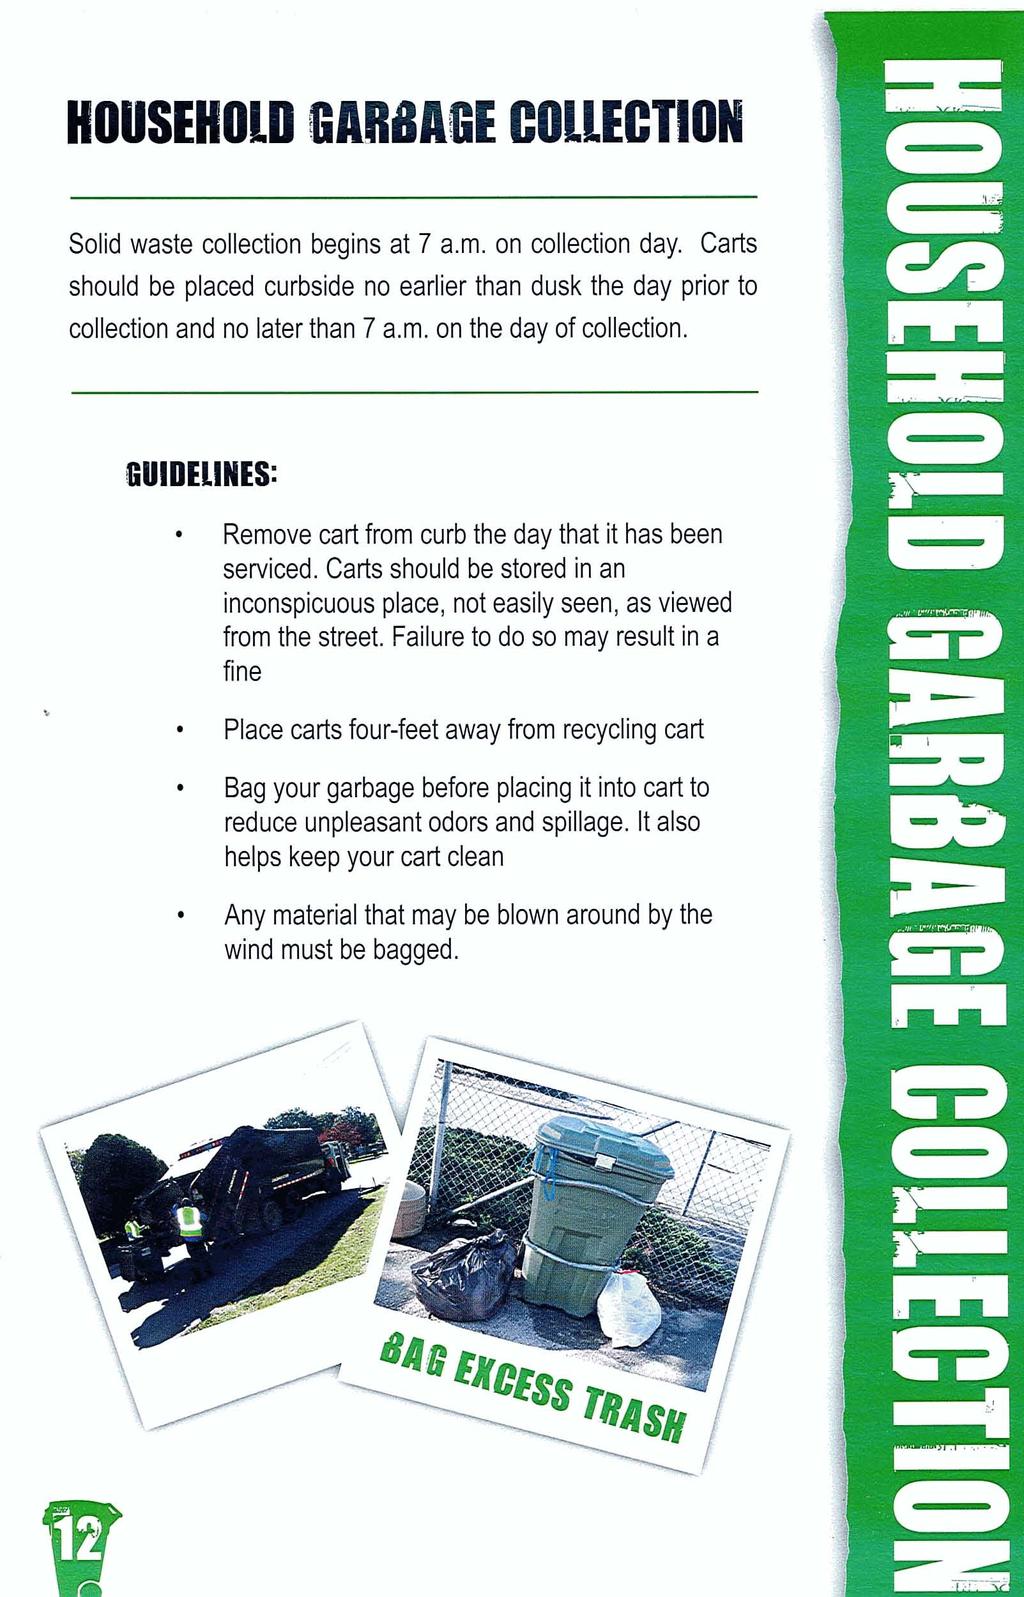 Solid waste collection begins at 7 a.m. on collection day. Carts should be placed curbside no earlier than dusk the day prior to collection and no later than 7 a.m. on the day of collection.